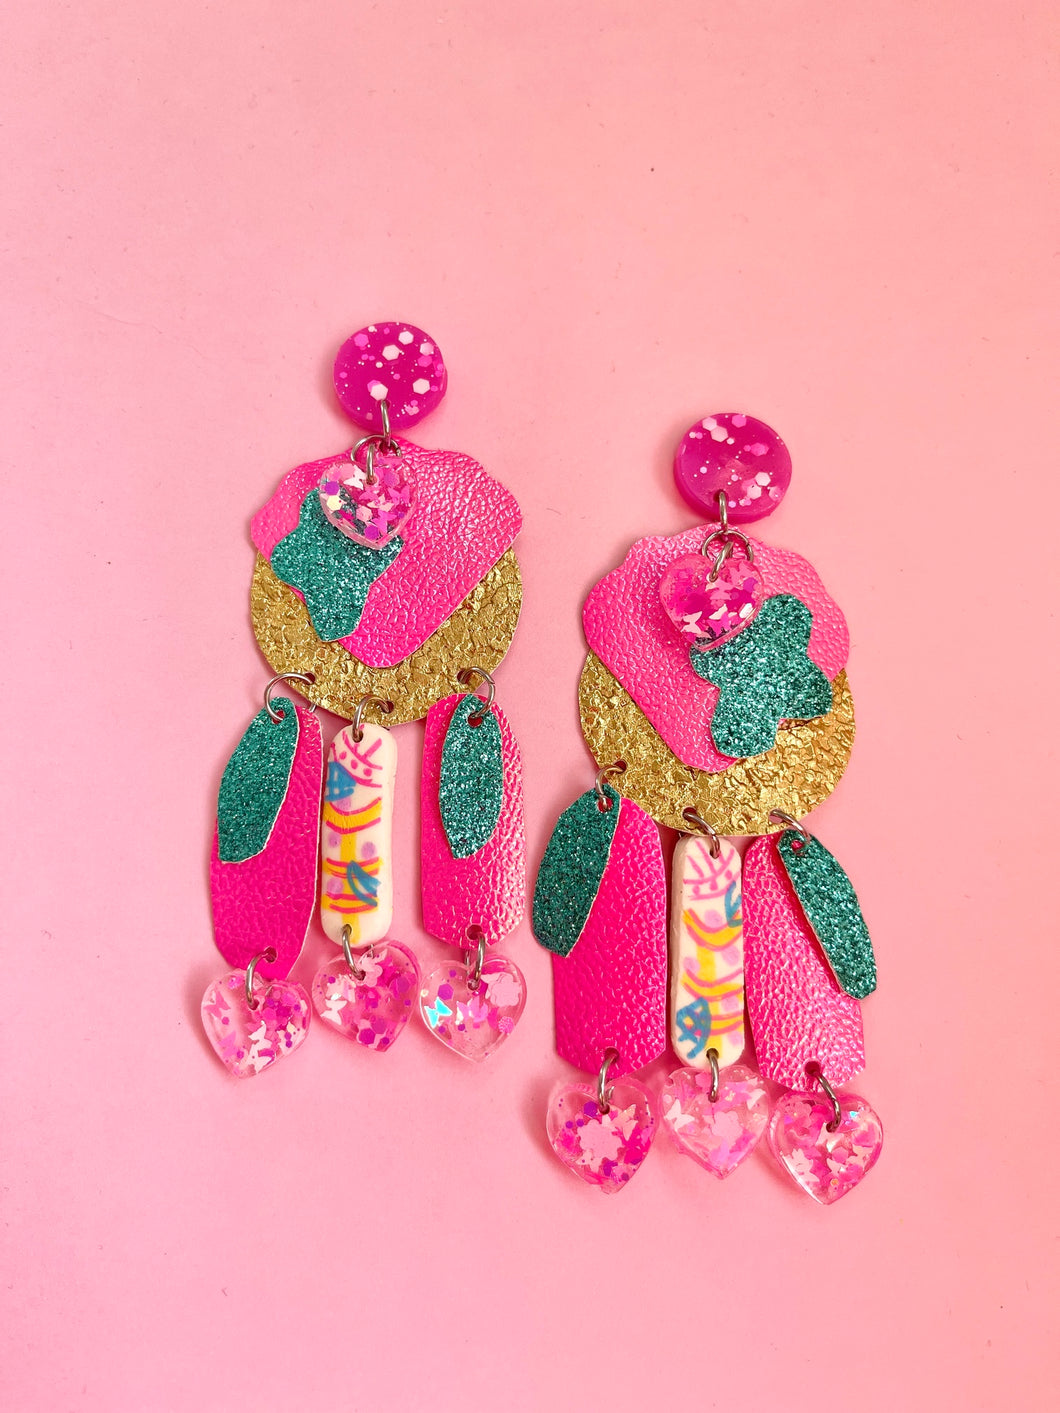 Barbie world metallic pink and gold dangles